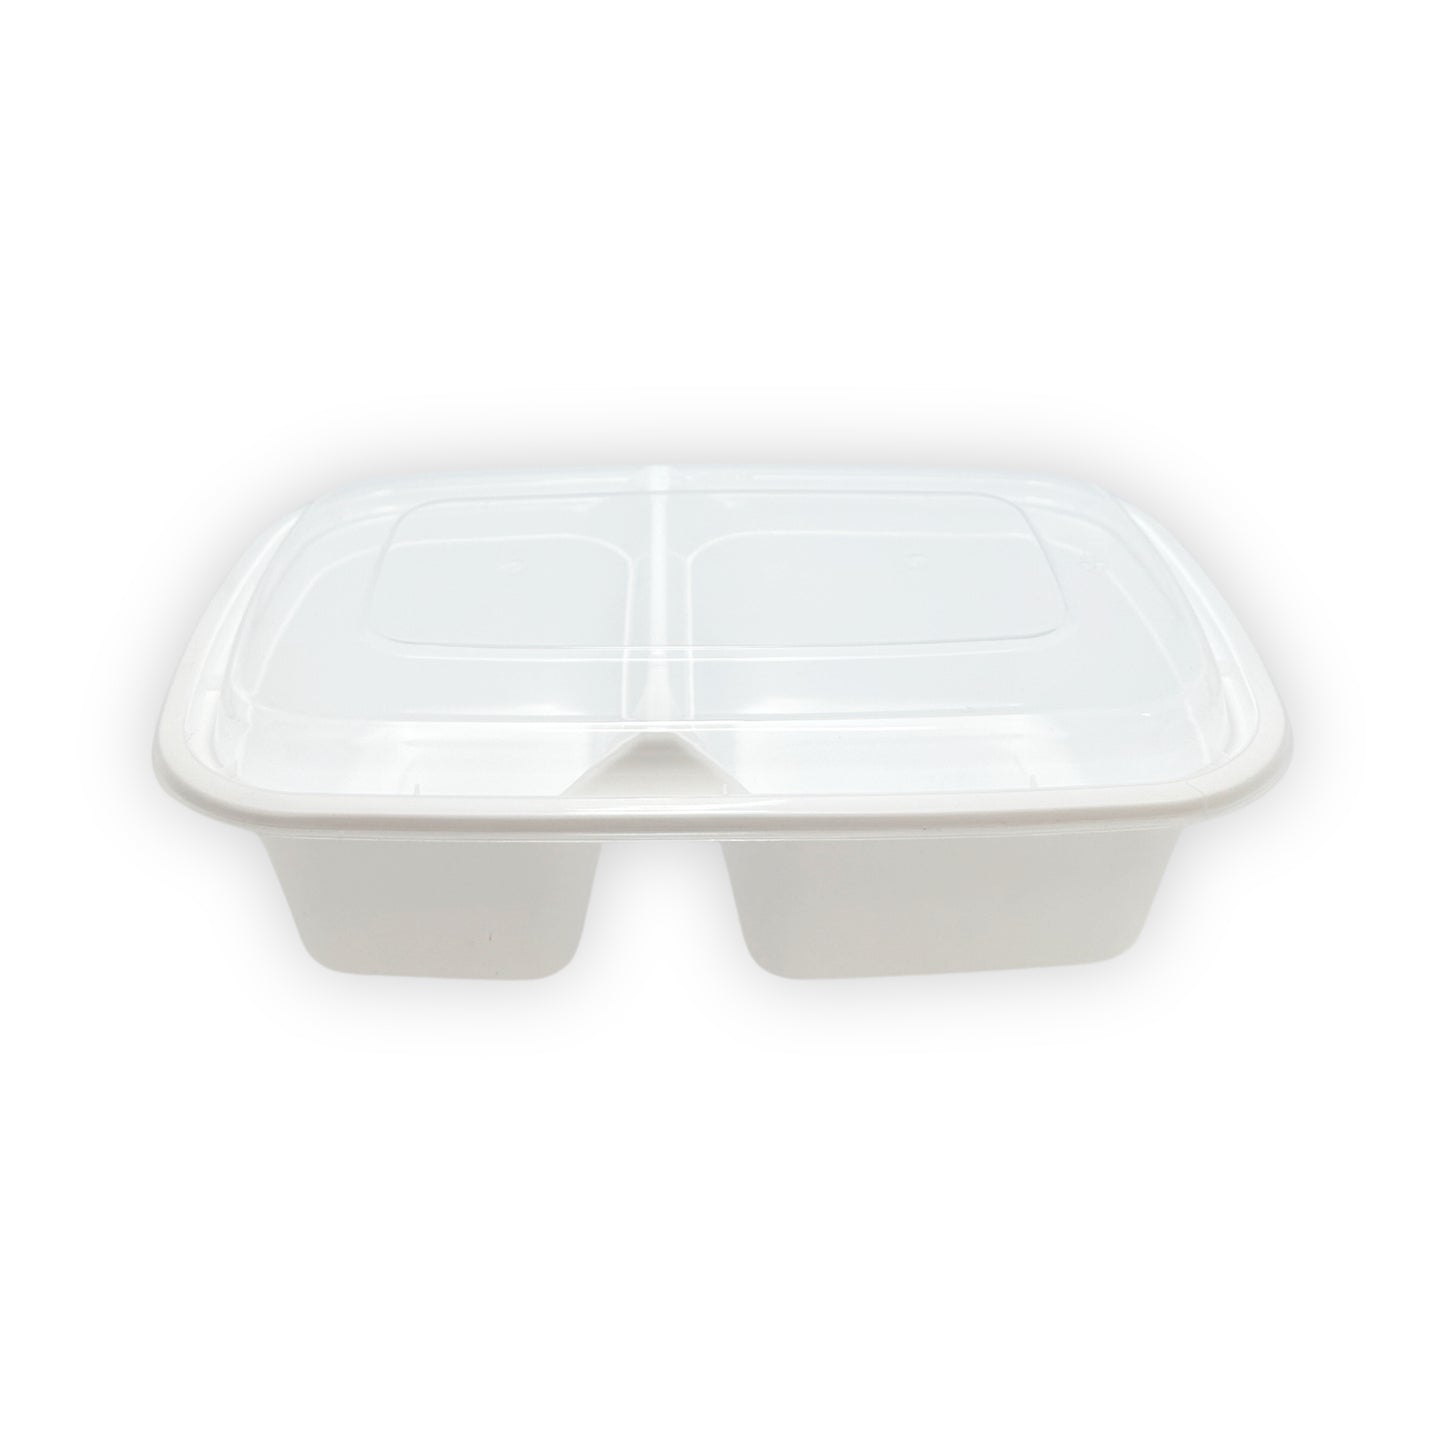 KIS-KY238G | 150sets 38oz, 1124ml 2-Compartment White PP Rectangle Container with Clear Lids Combo; $0.281/set